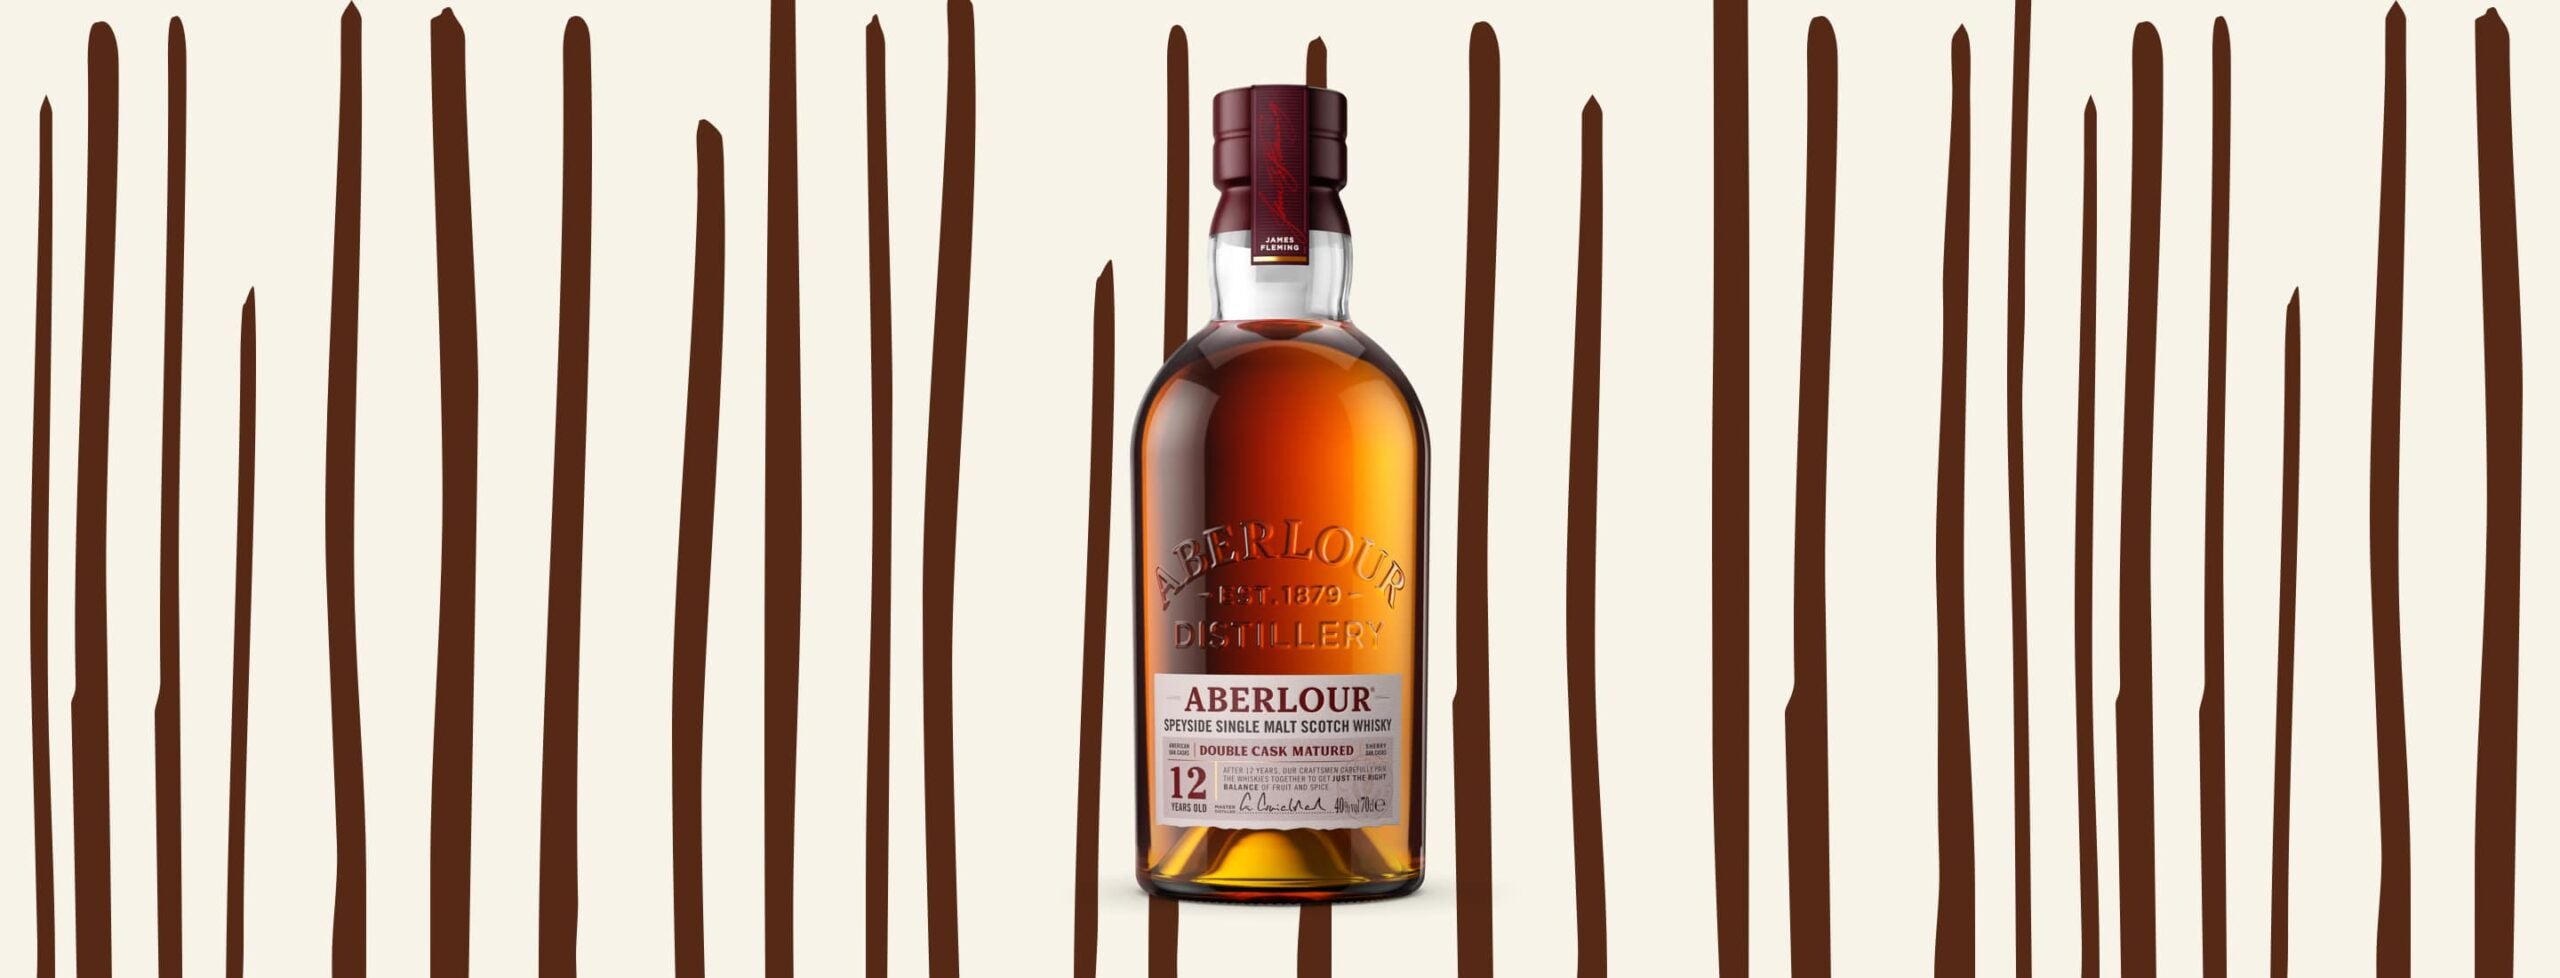 12 Year Old Double Cask Scotch Whisky - Aberlour